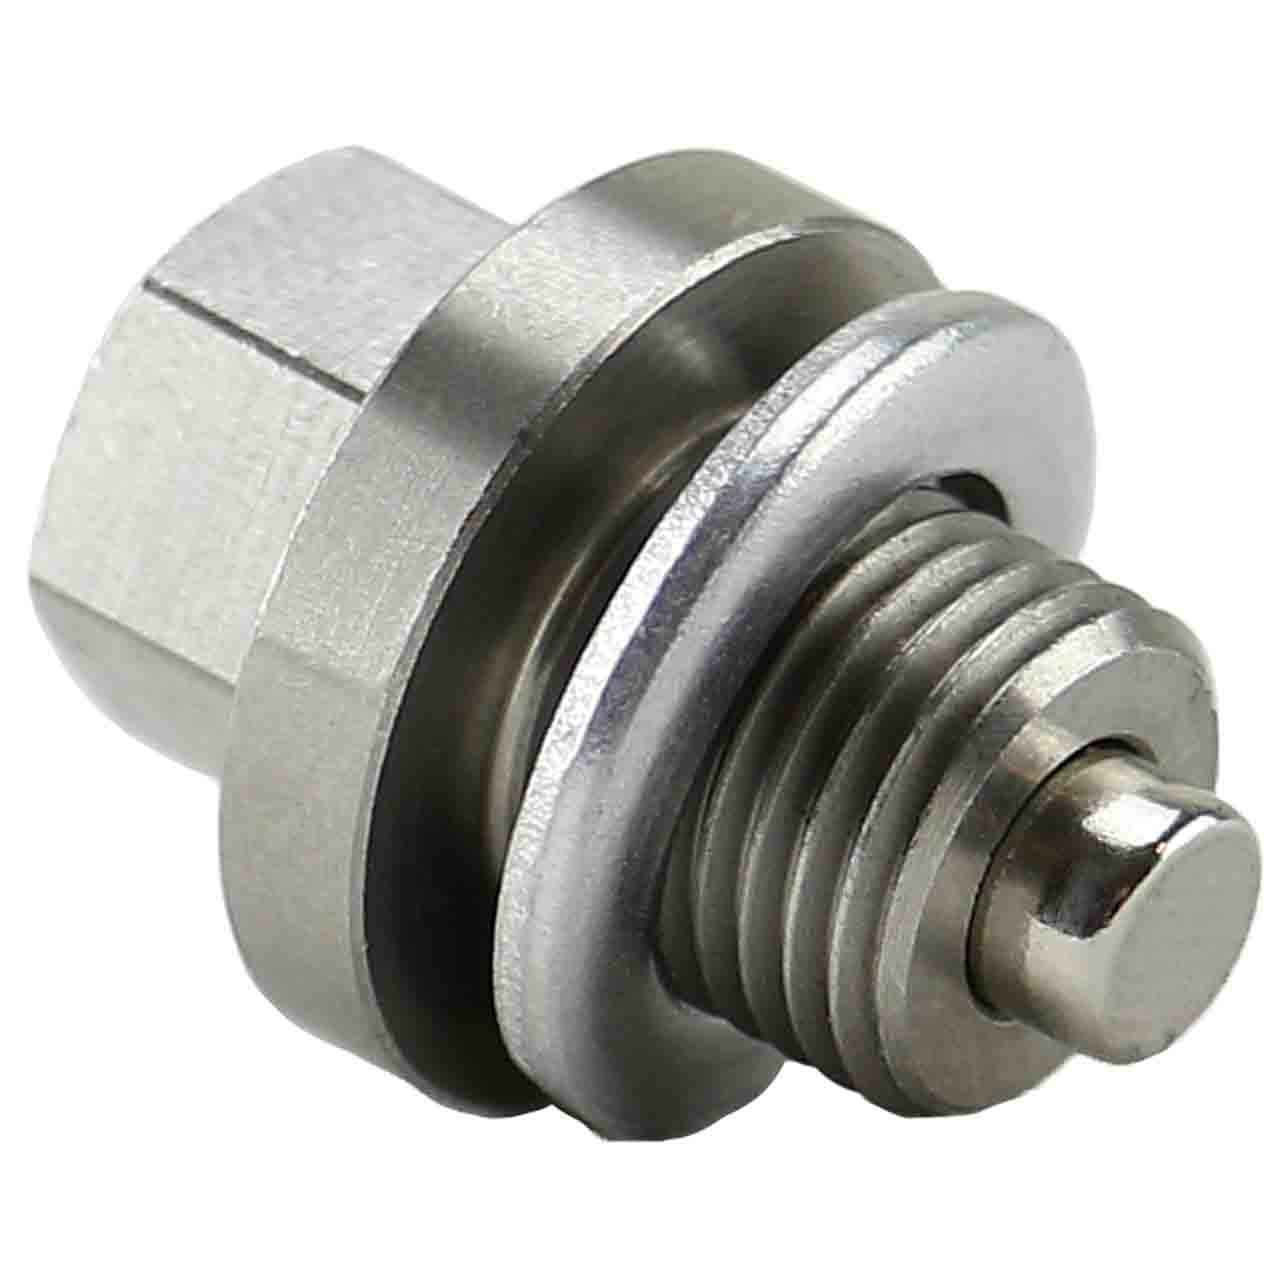 N-902-818-03 for Audi/VW - Stainless Steel Magnetic Oil Drain/Fill Plug with Neodymium Magnet - Made In USA